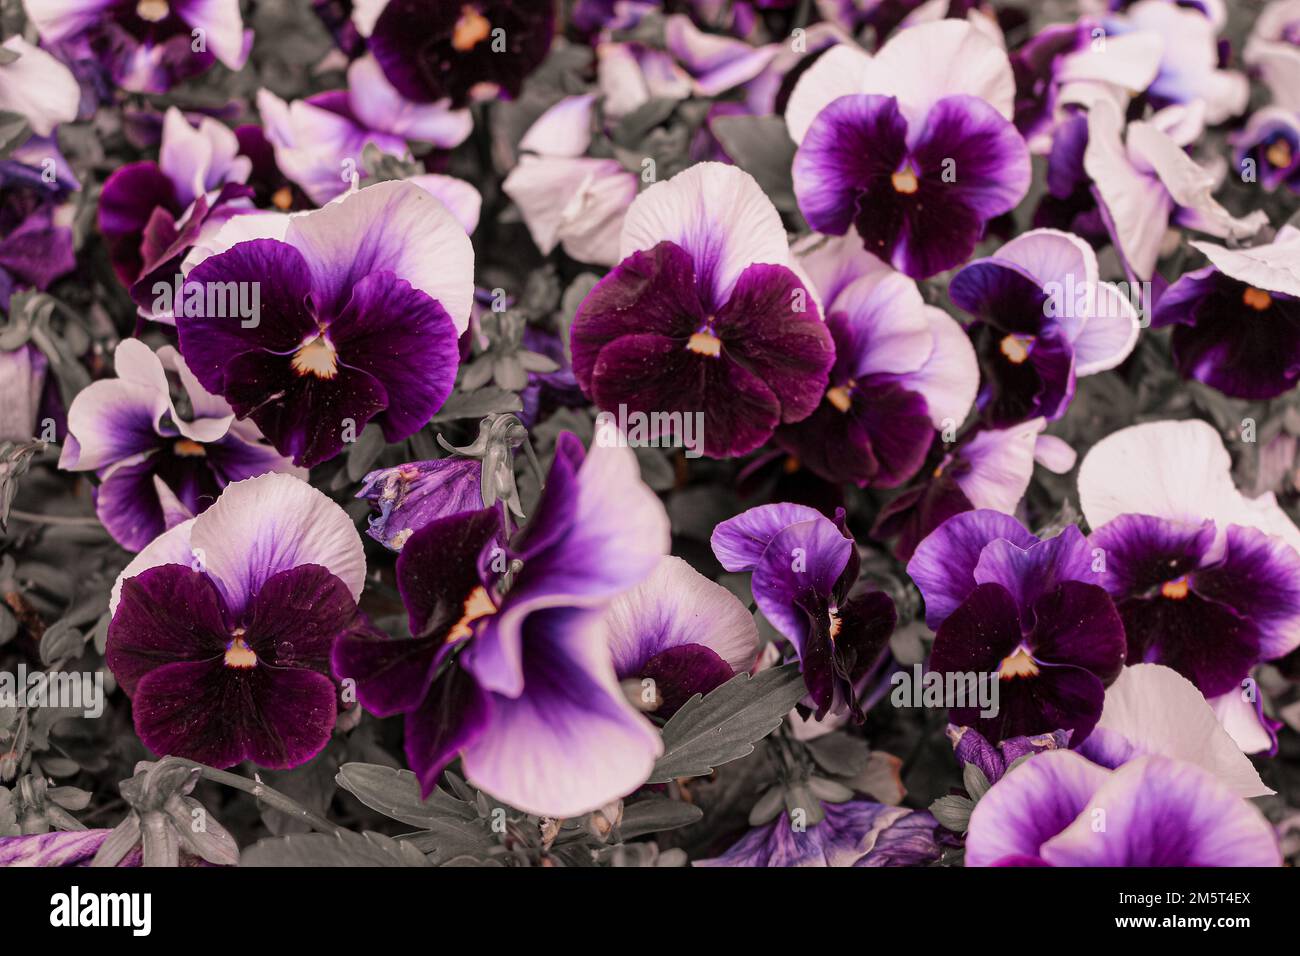 Colorful pansies in bloom. Photographed at the arboretum in Budapest. Stock Photo